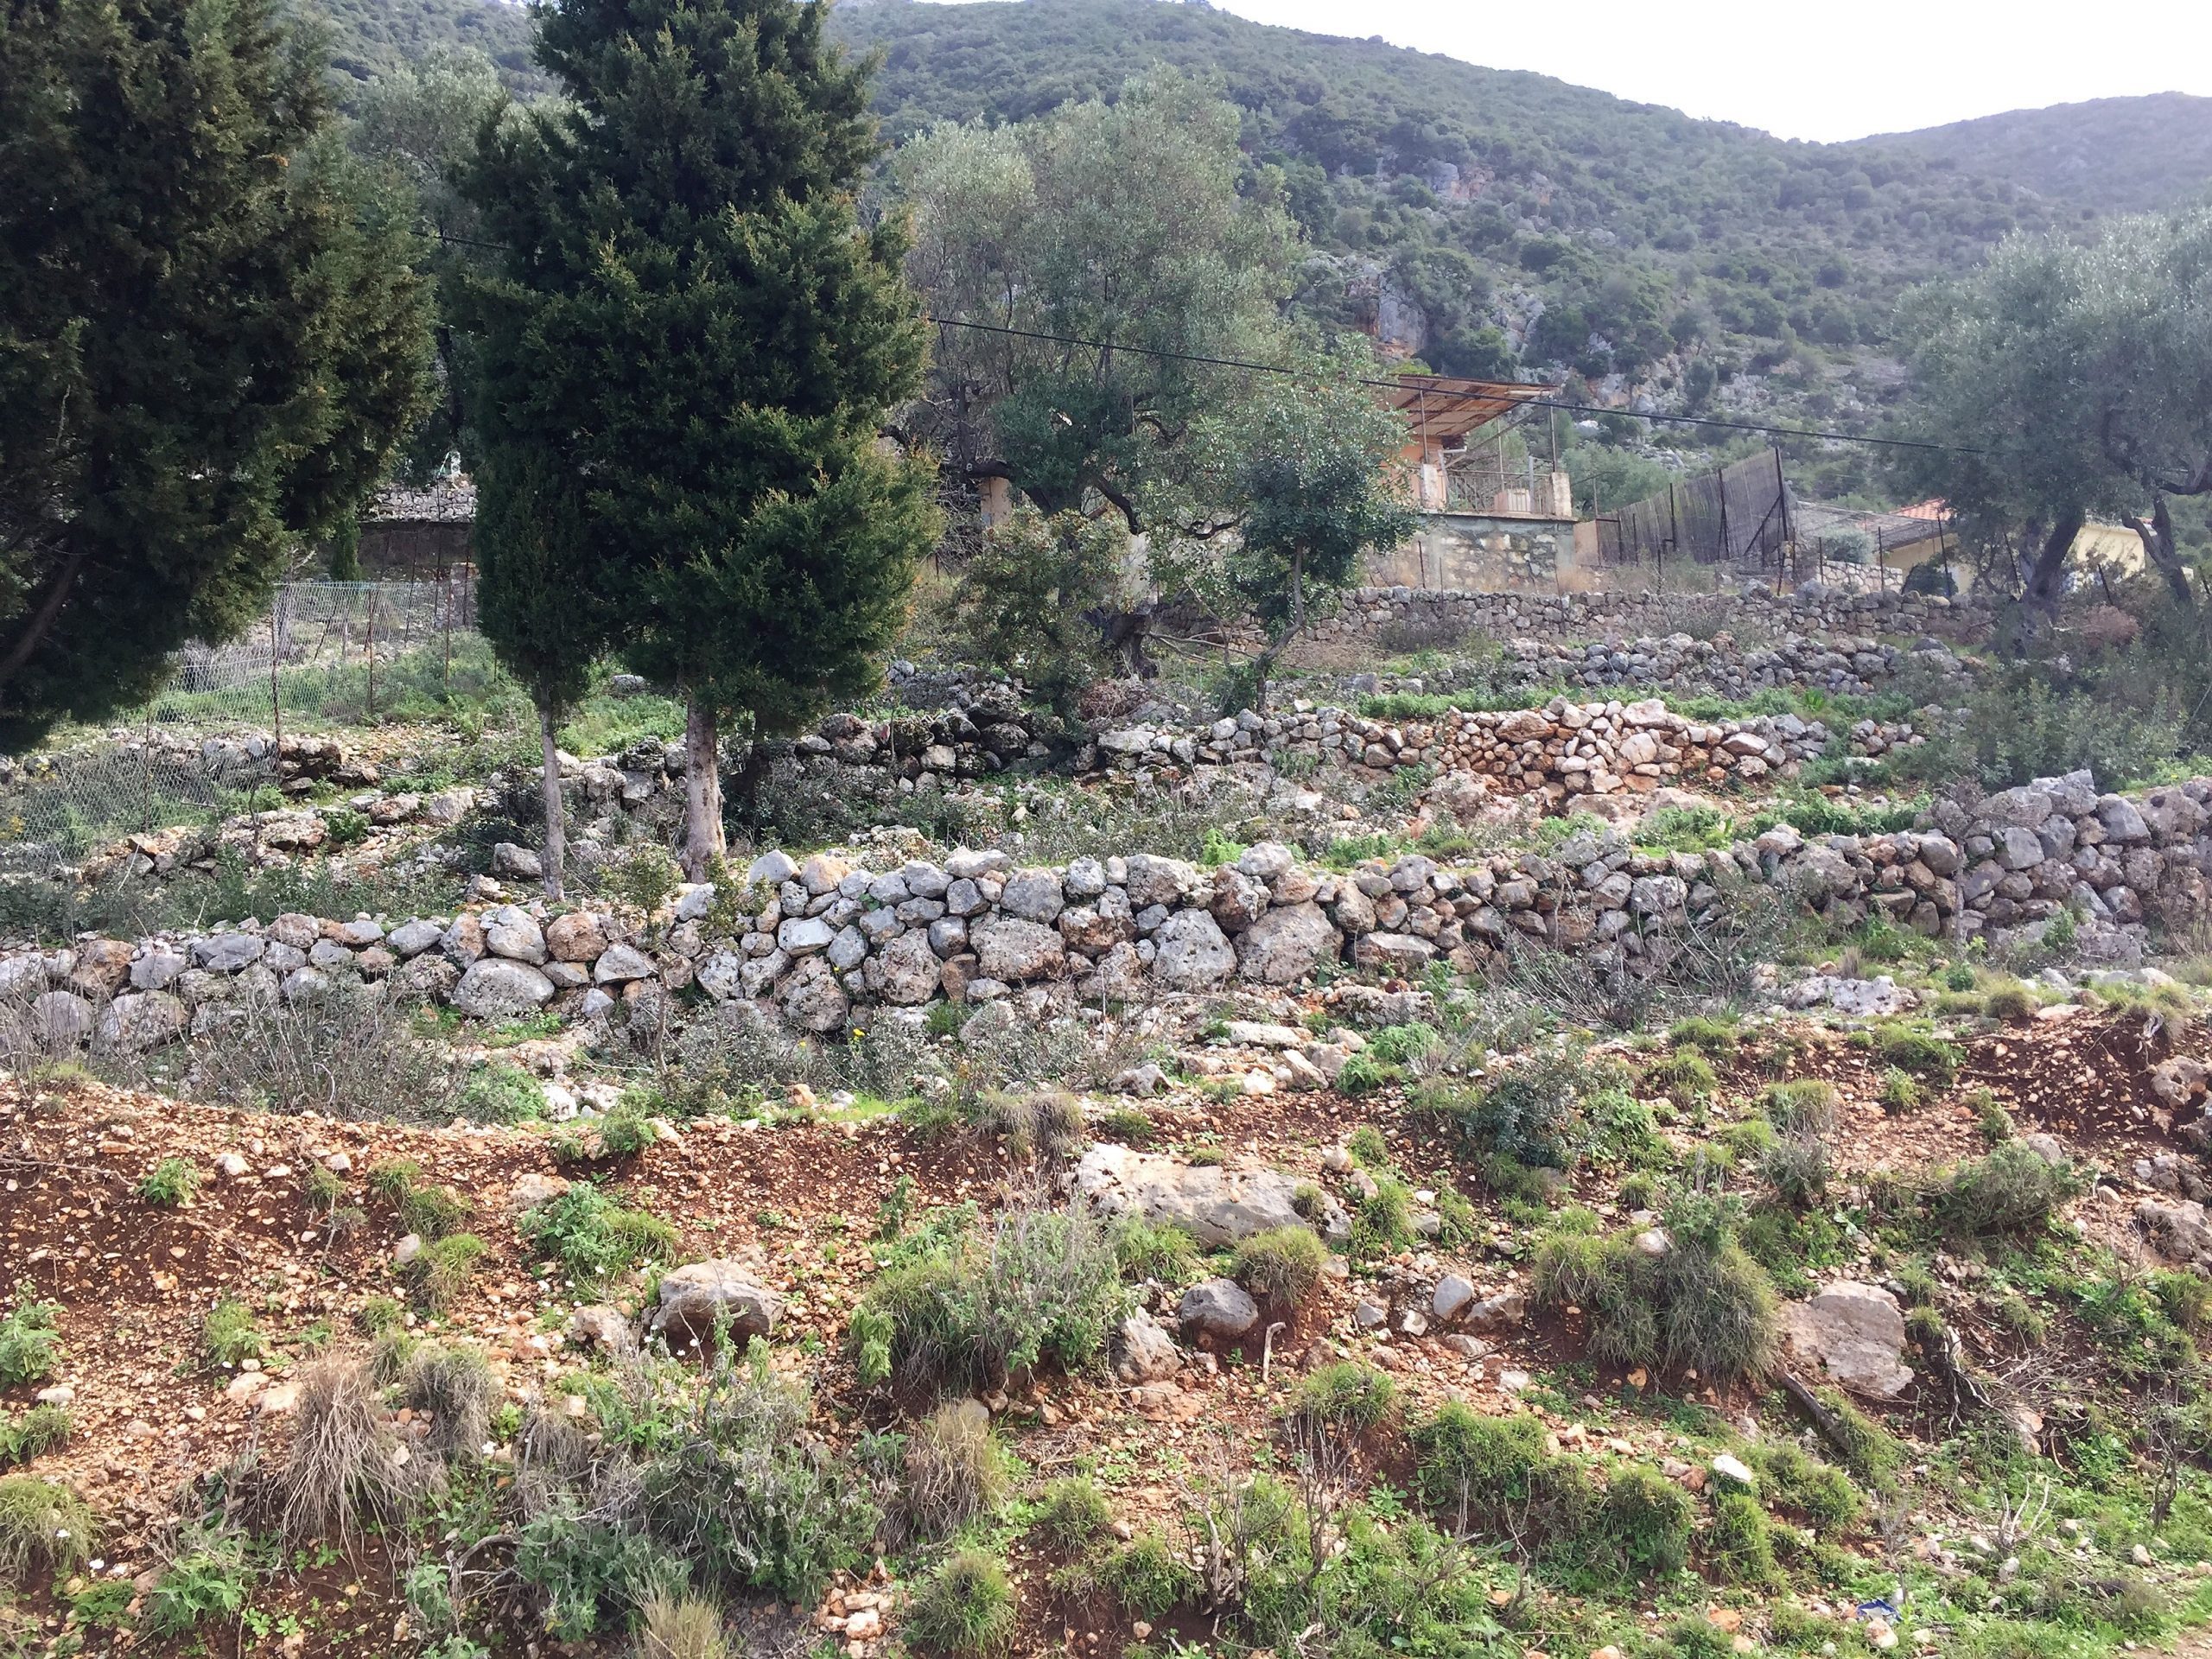 Terrain of property for sale on Ithaca Greece